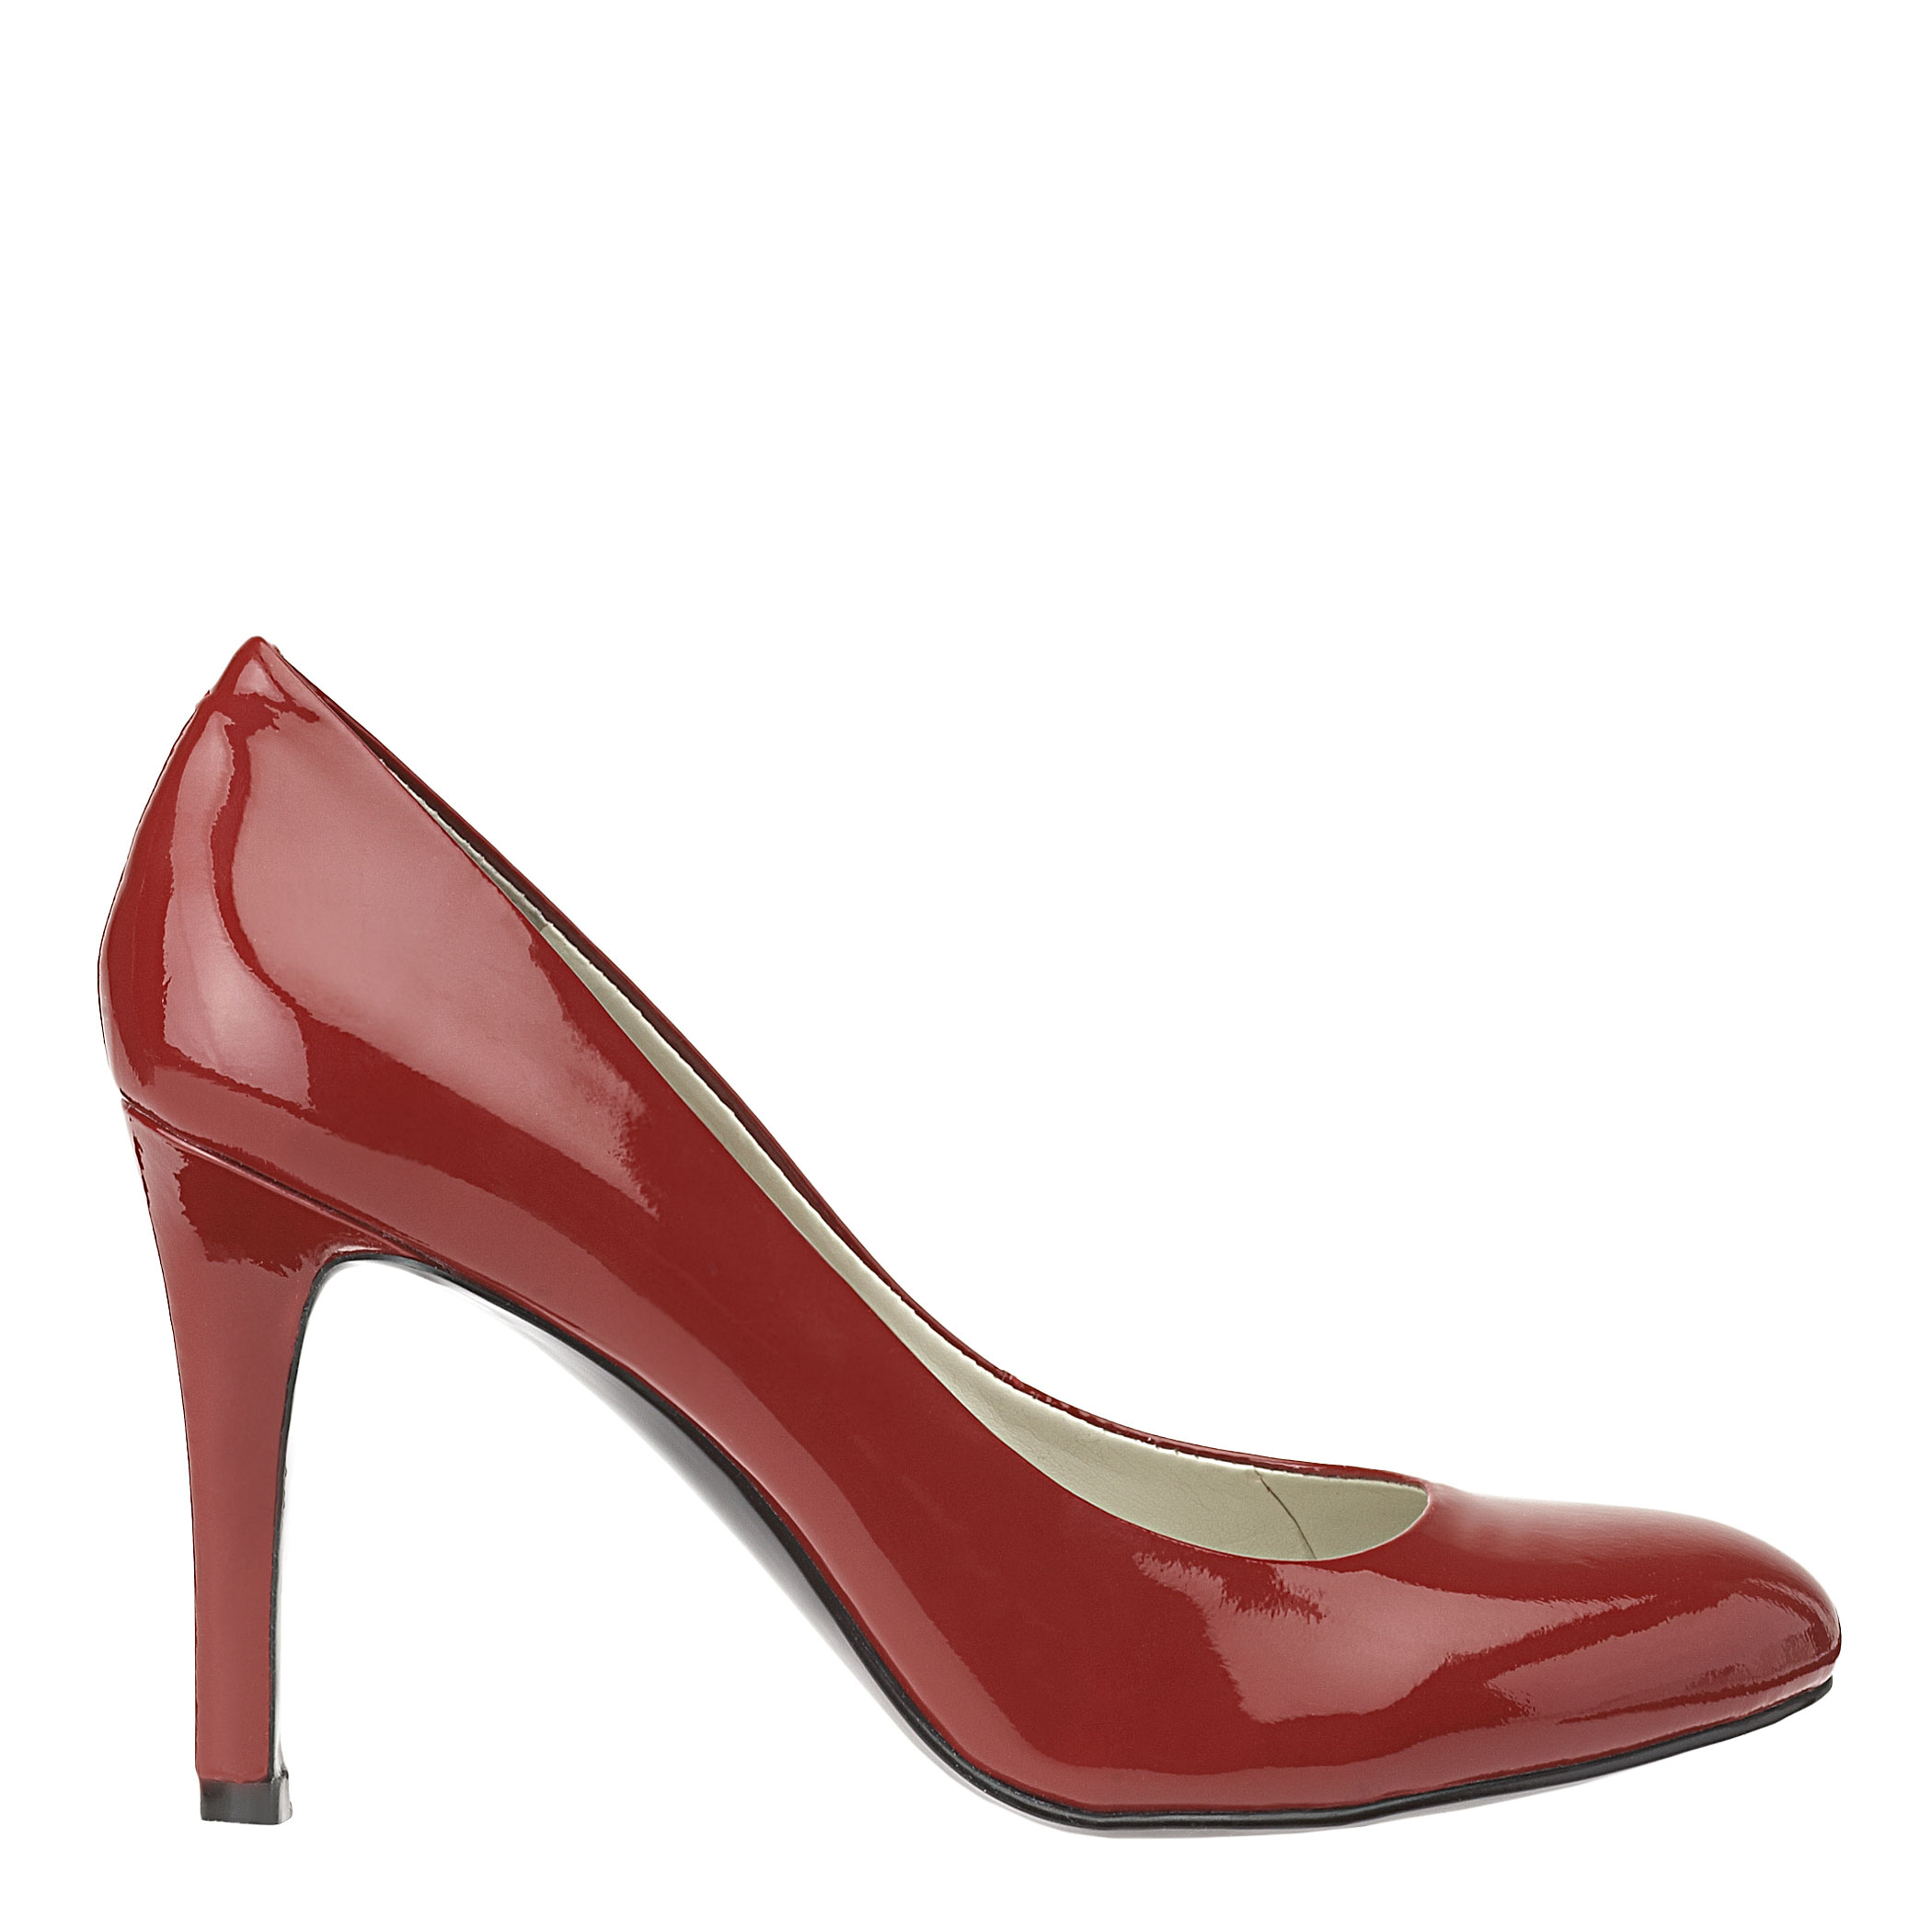 Nine West Caress Round Toe High Heels in Red Patent Leather (Red) - Lyst